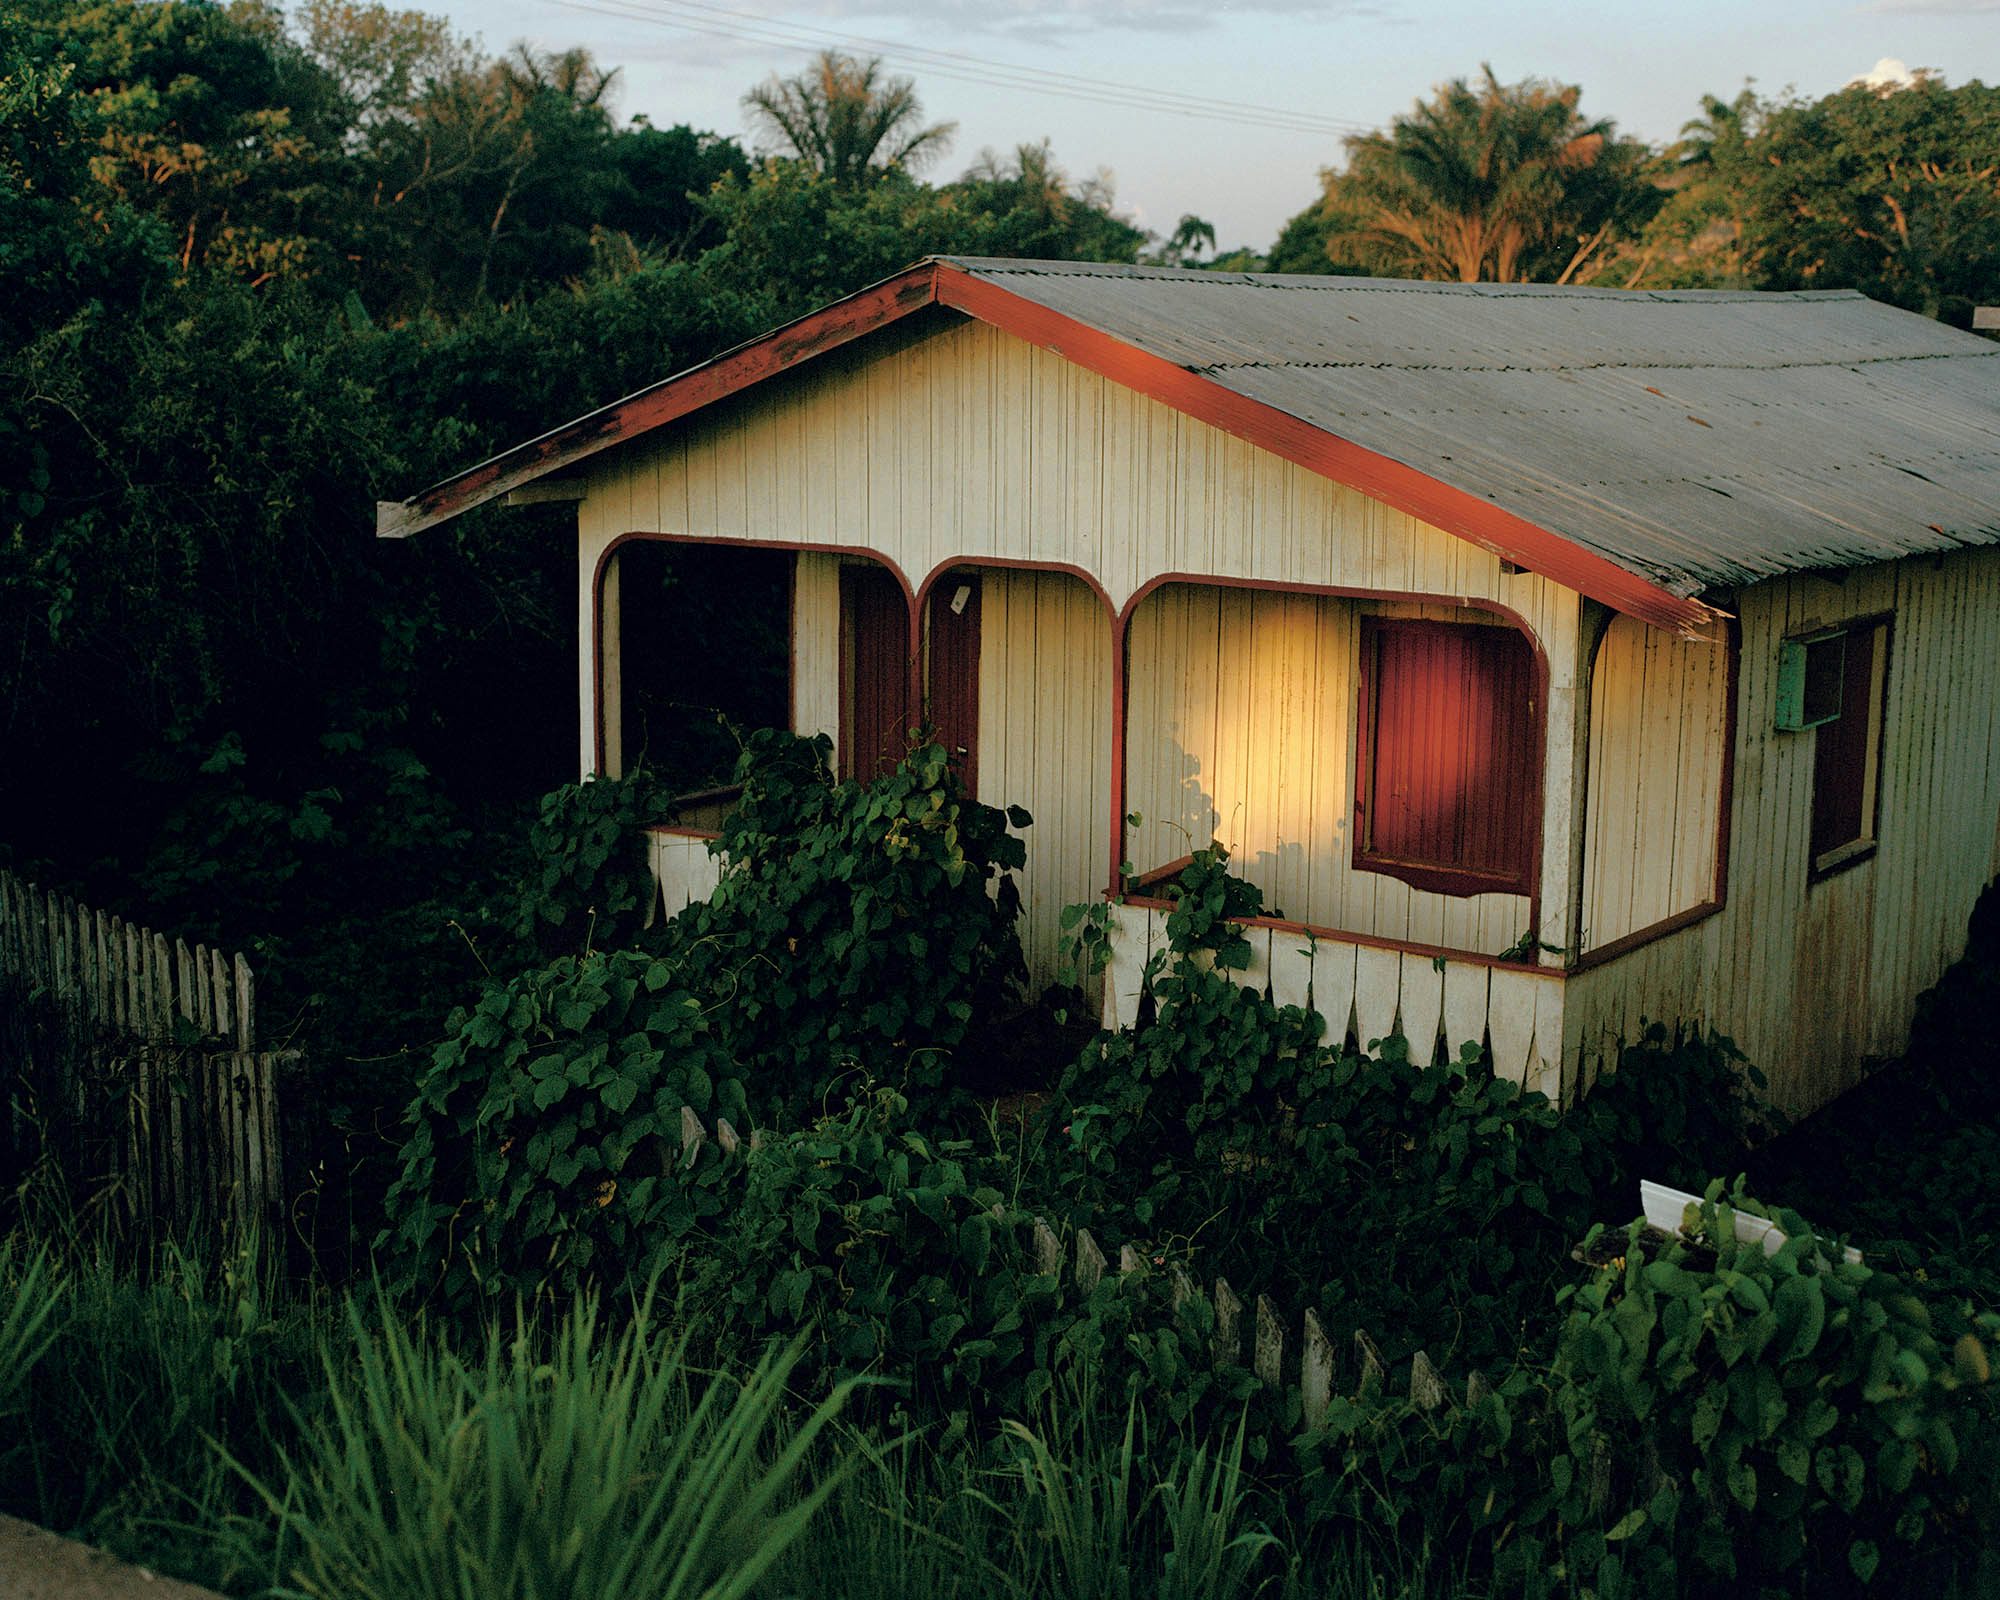 Photograph of the exterior of a building surrounded by greenery in Like a River by Daniel Jack Lyons